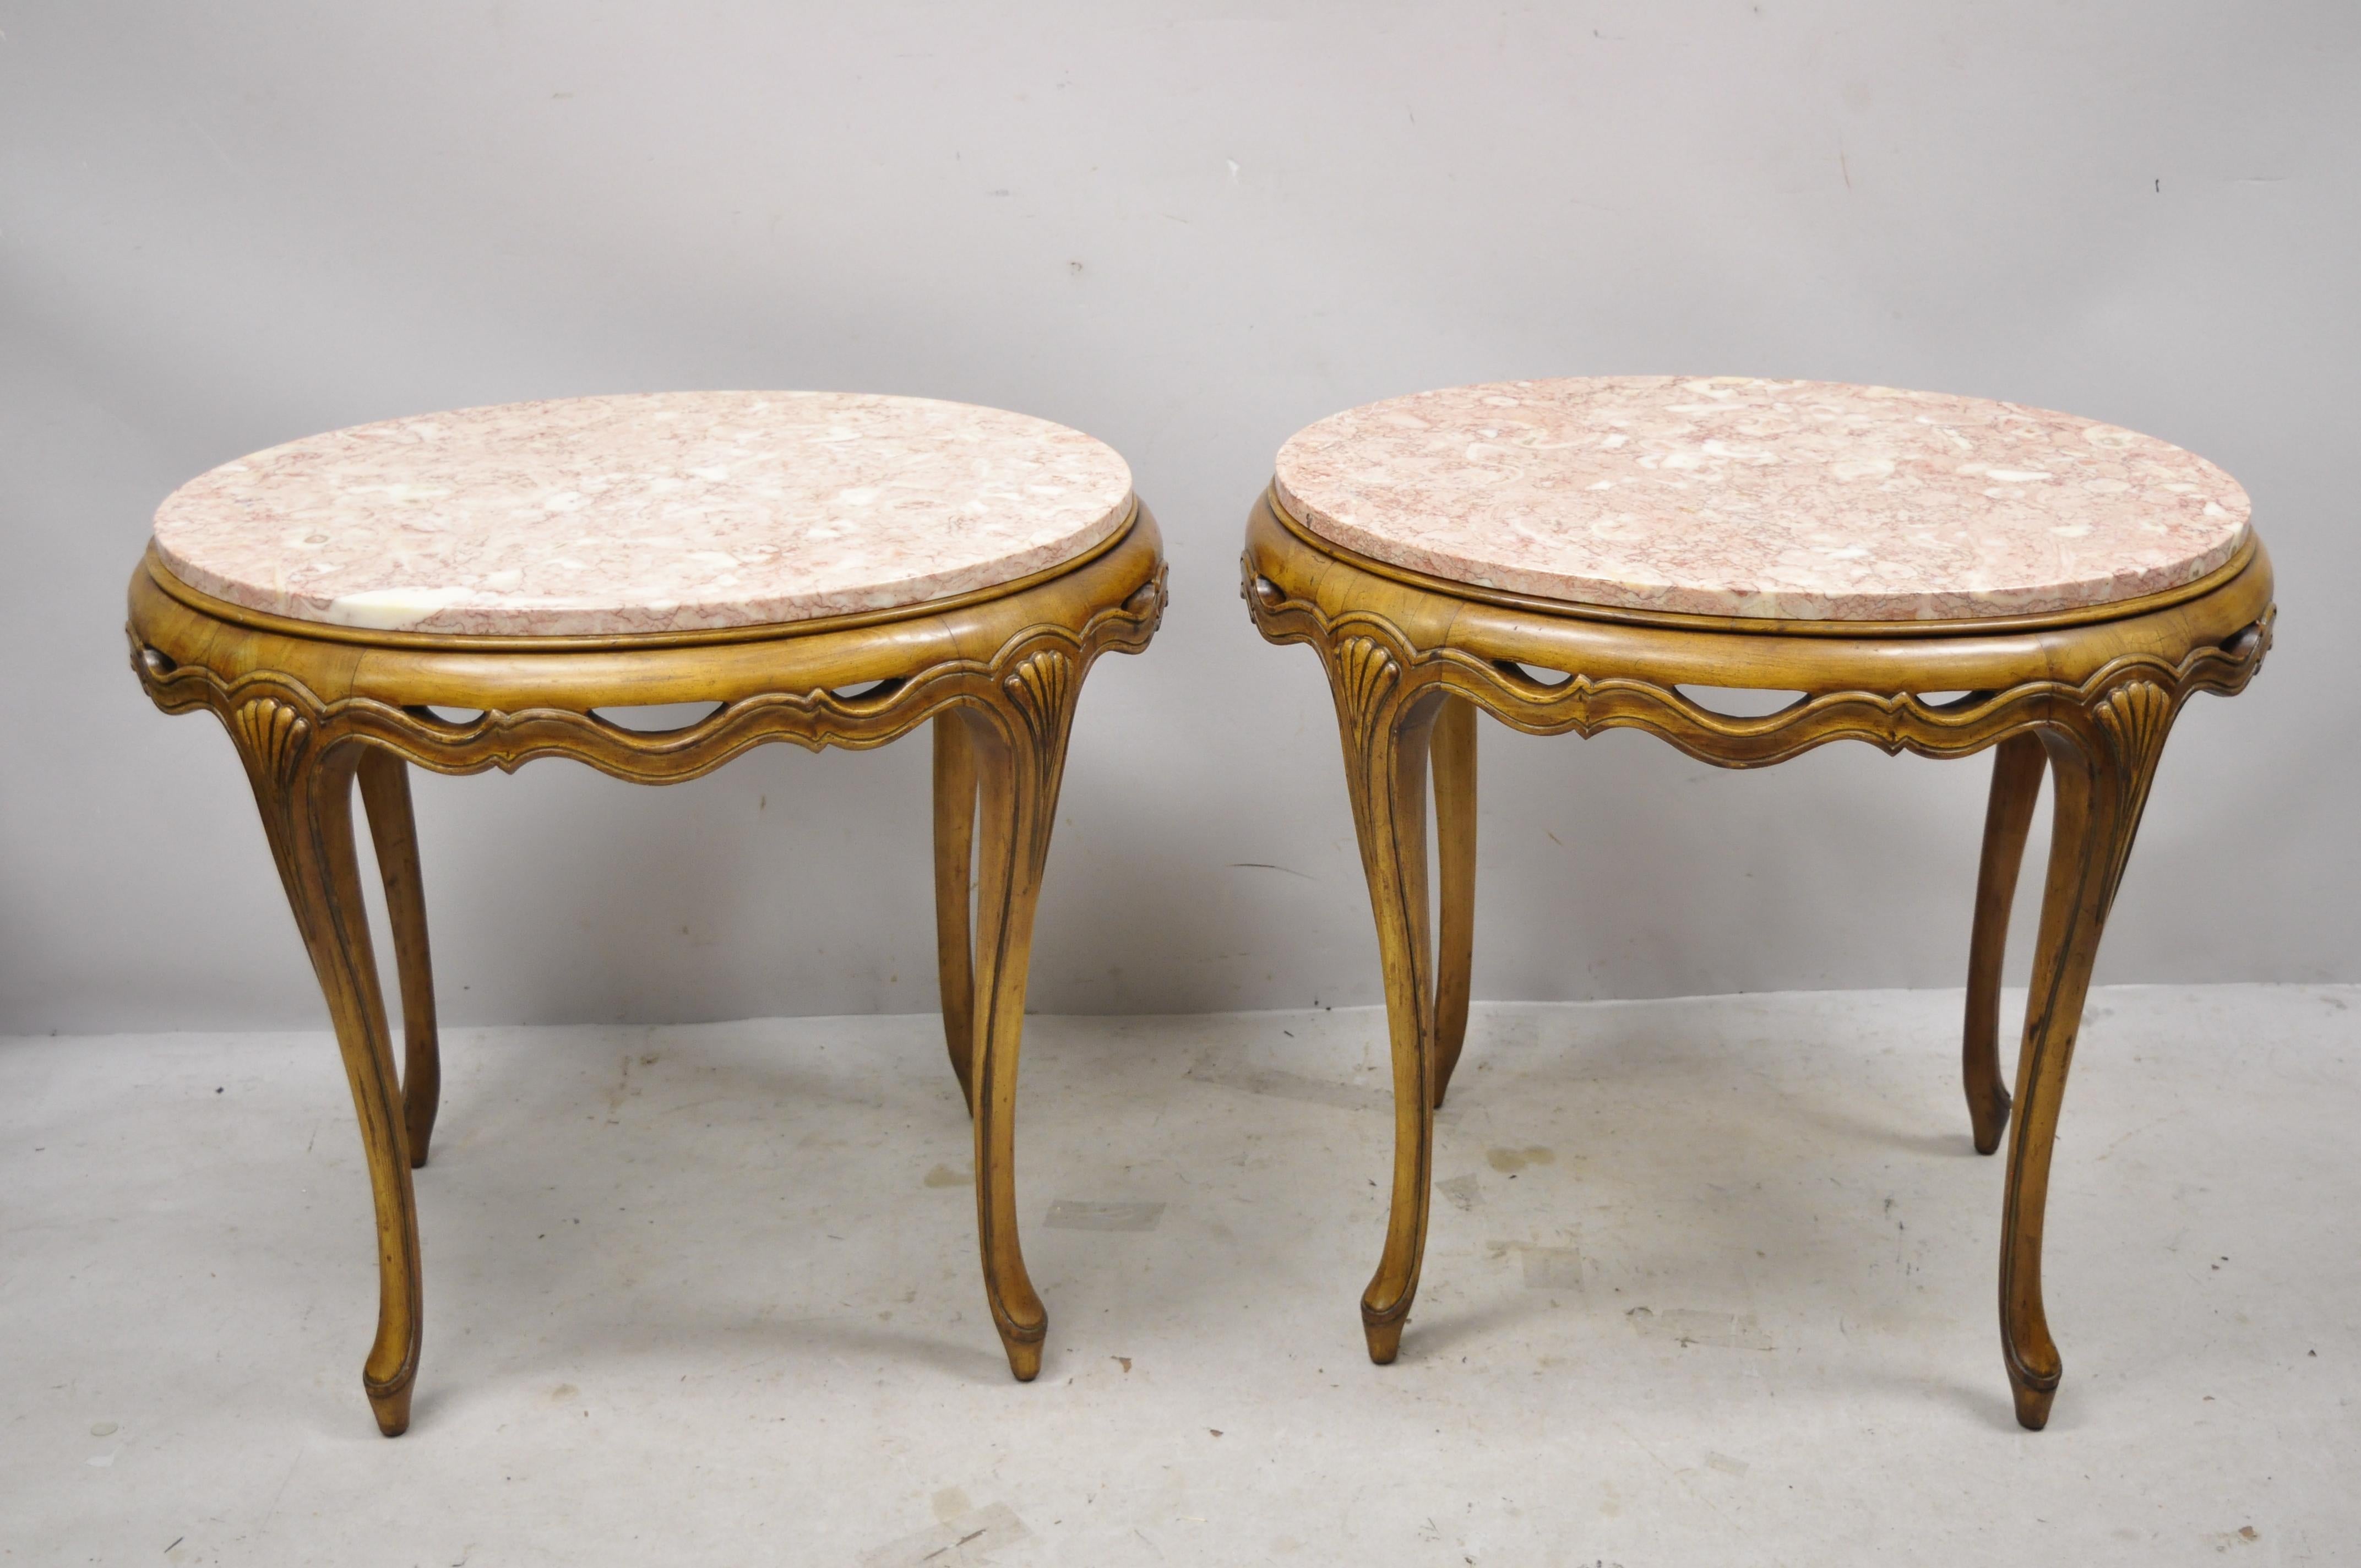 Vintage Italian Hollywood Regency pink oval marble-top pretzel carved side end tables, a pair. Item features pierce carved inter-woven skirt, pink oval marble tops, solid wood frame, cabriole legs, great style and form, circa mid-20th century.